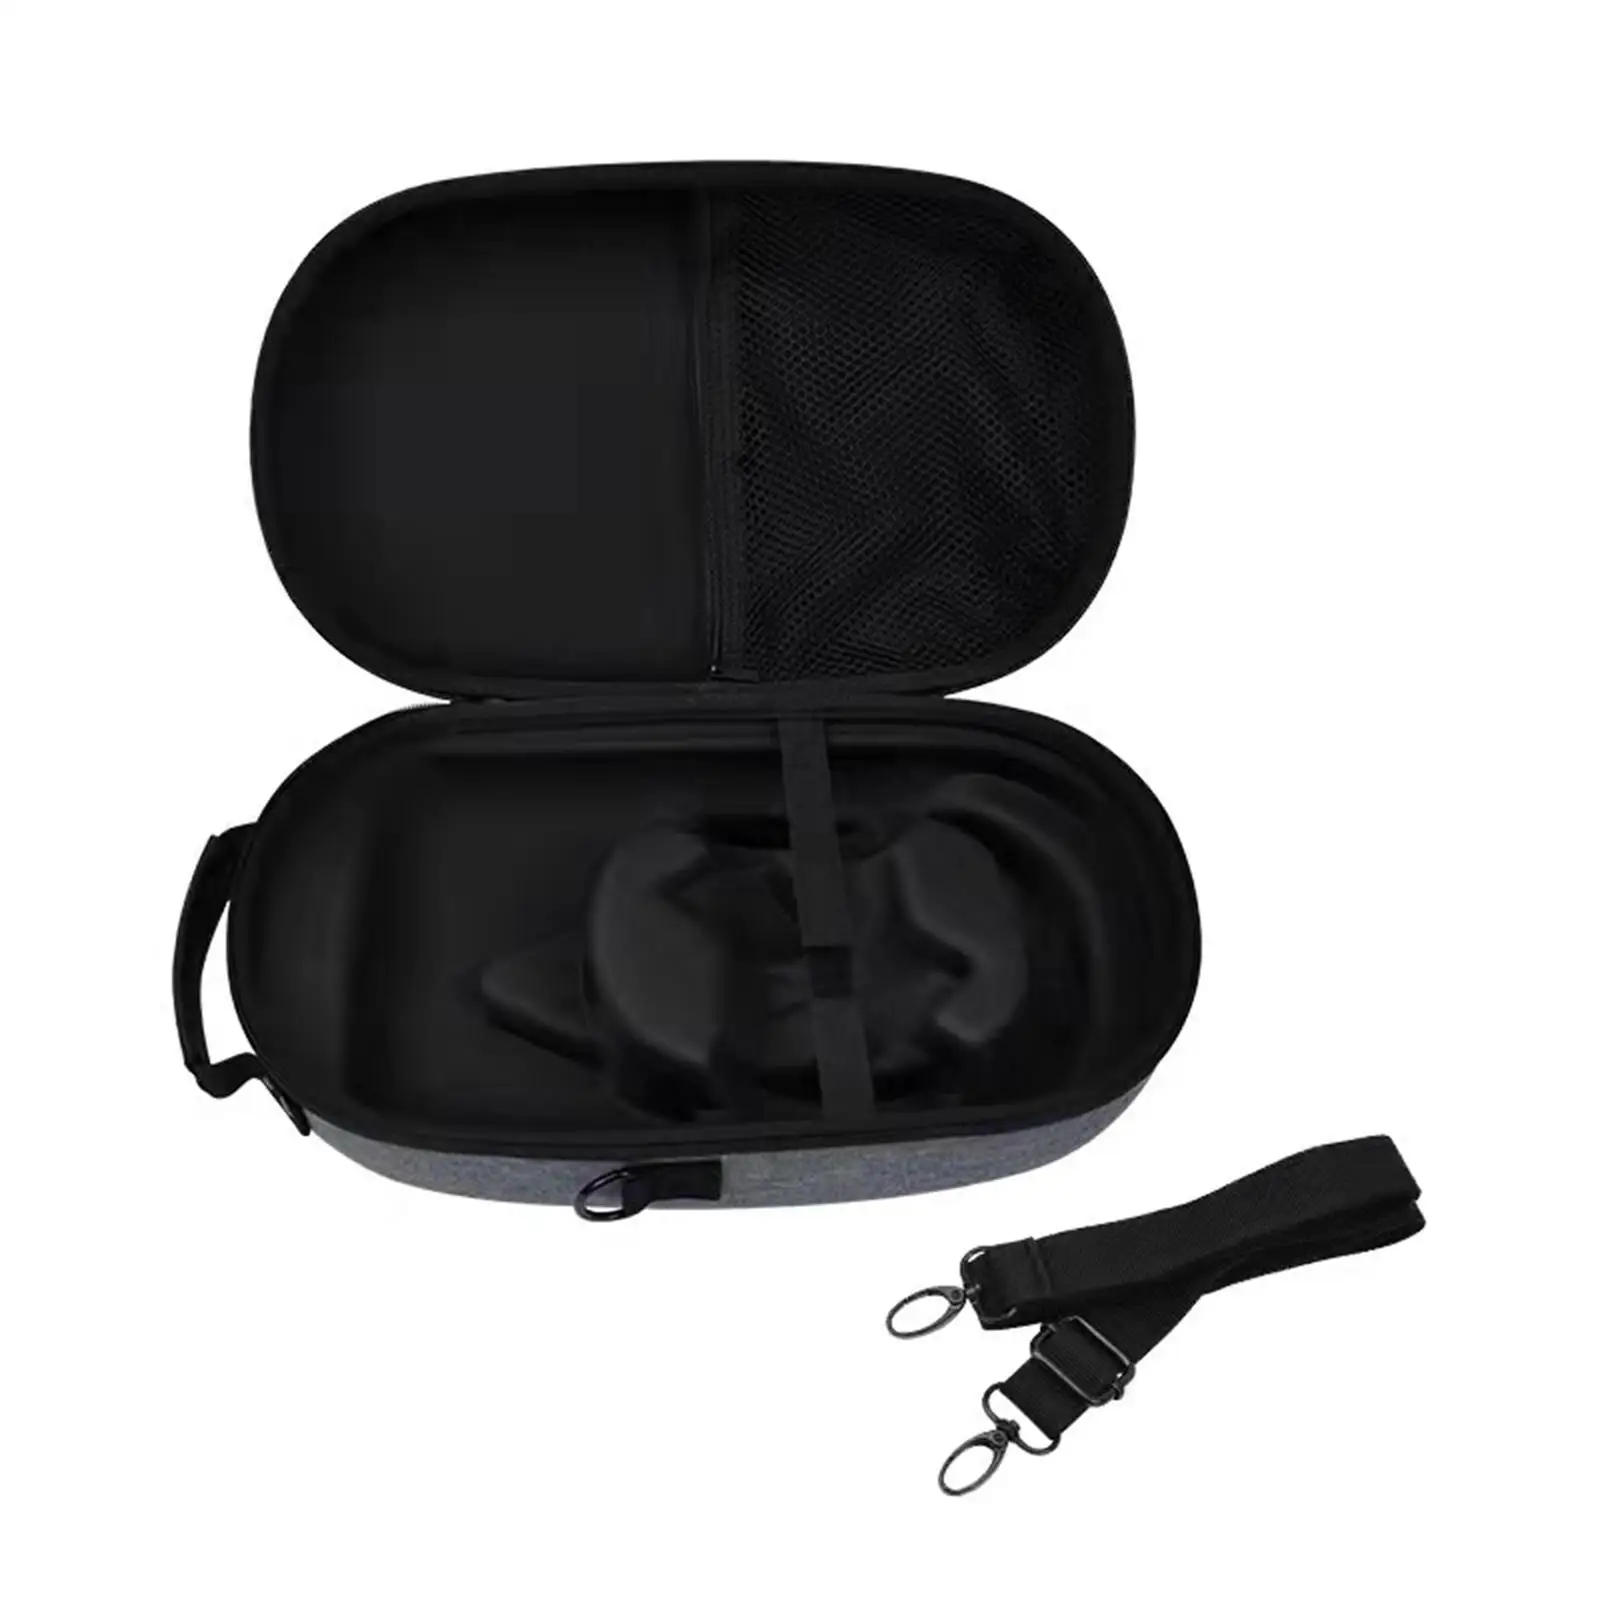 Travel Case Detachable Shoulder Strap for Pico Neo 3 Large Capacity Waterproof Accessories